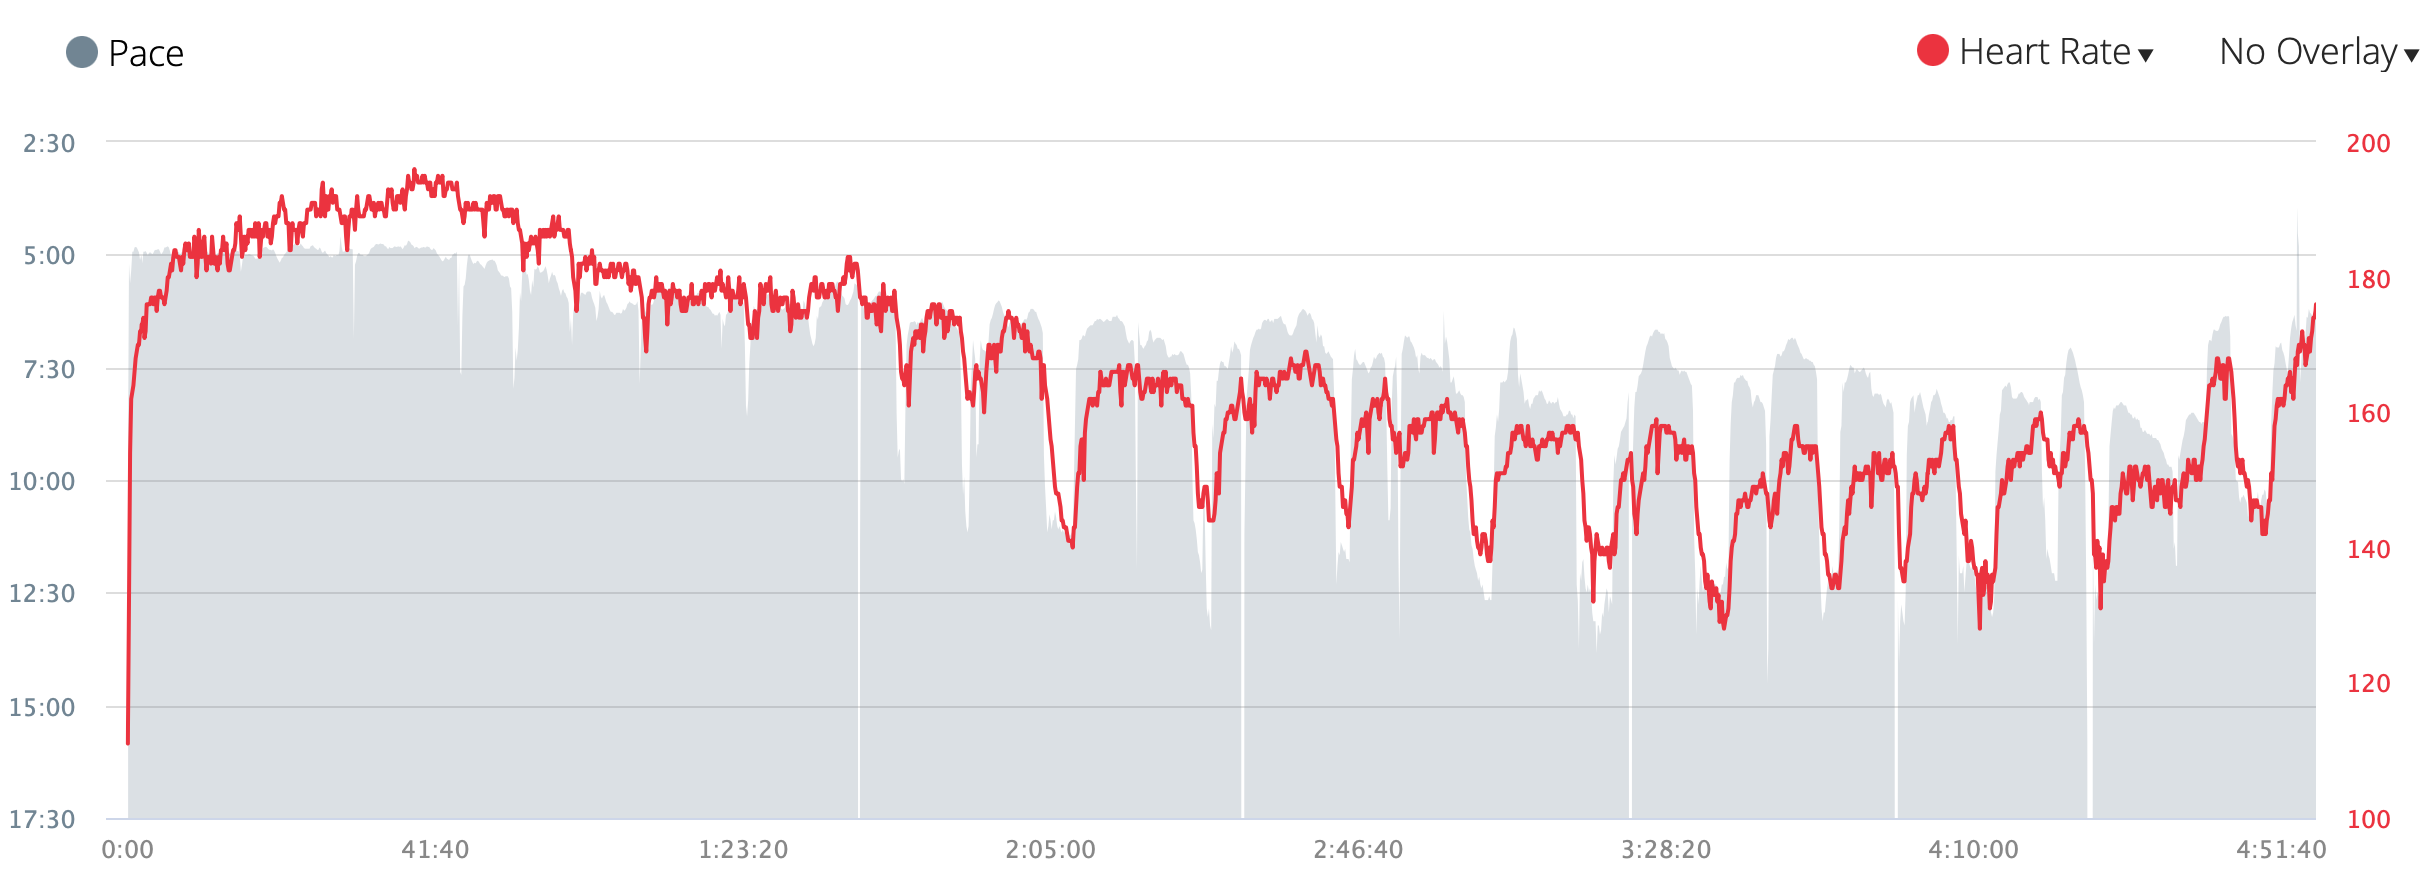 Marathon #1 heart rate and pace data